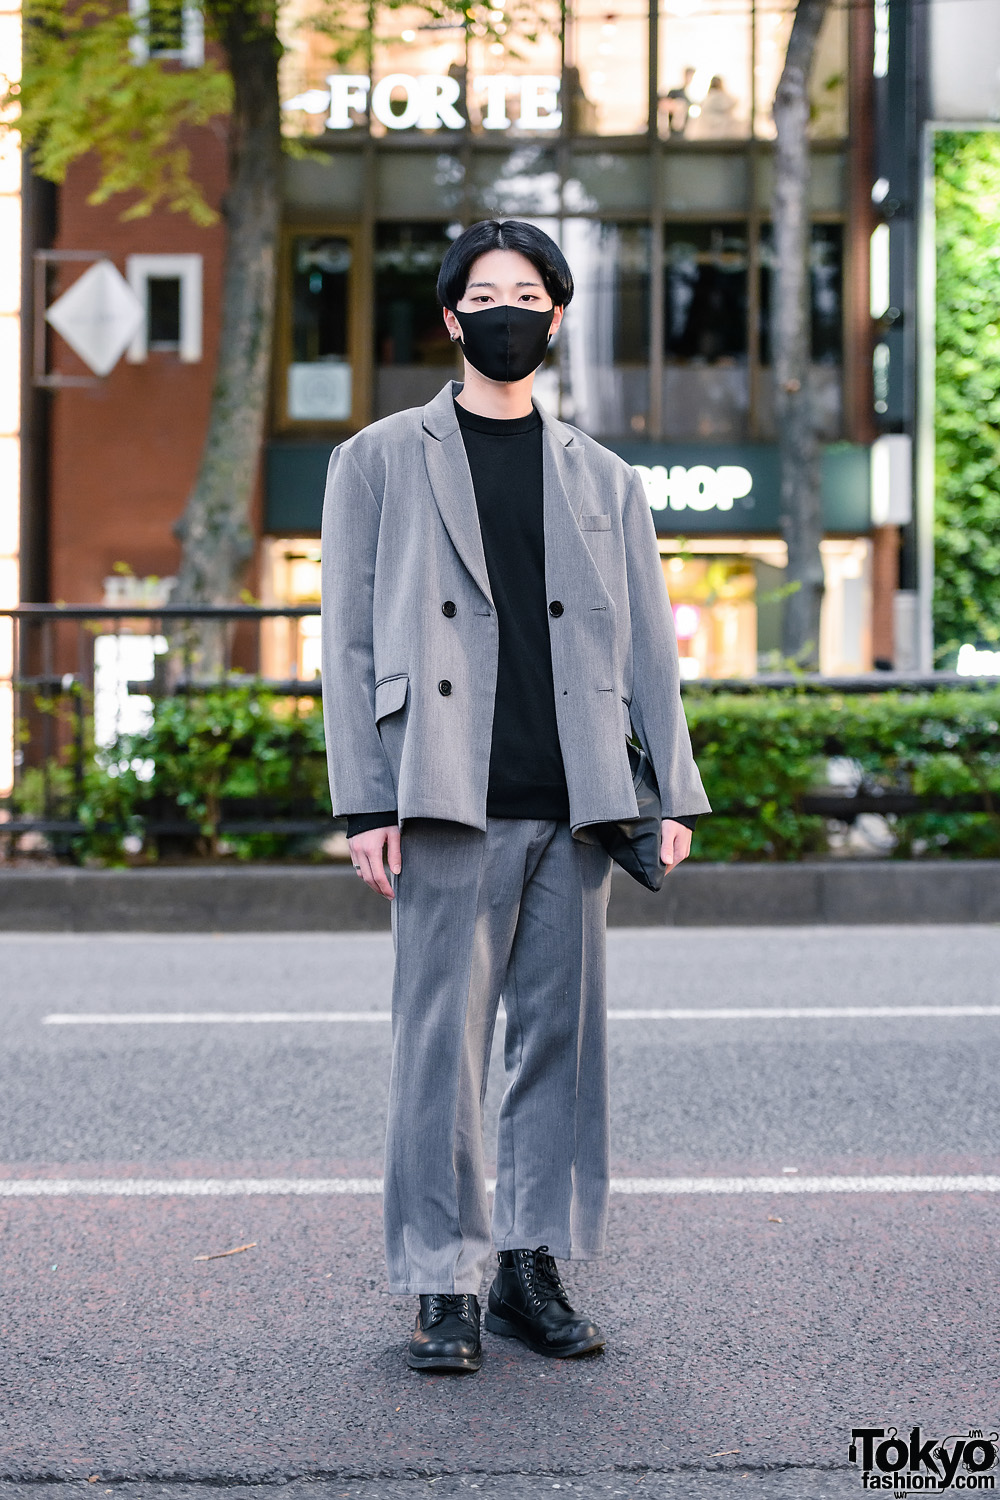 Harajuku Menswear Suit Style w/ Face Mask, Double-Breasted Blazer, Sweater, Clutch and Leather Boots